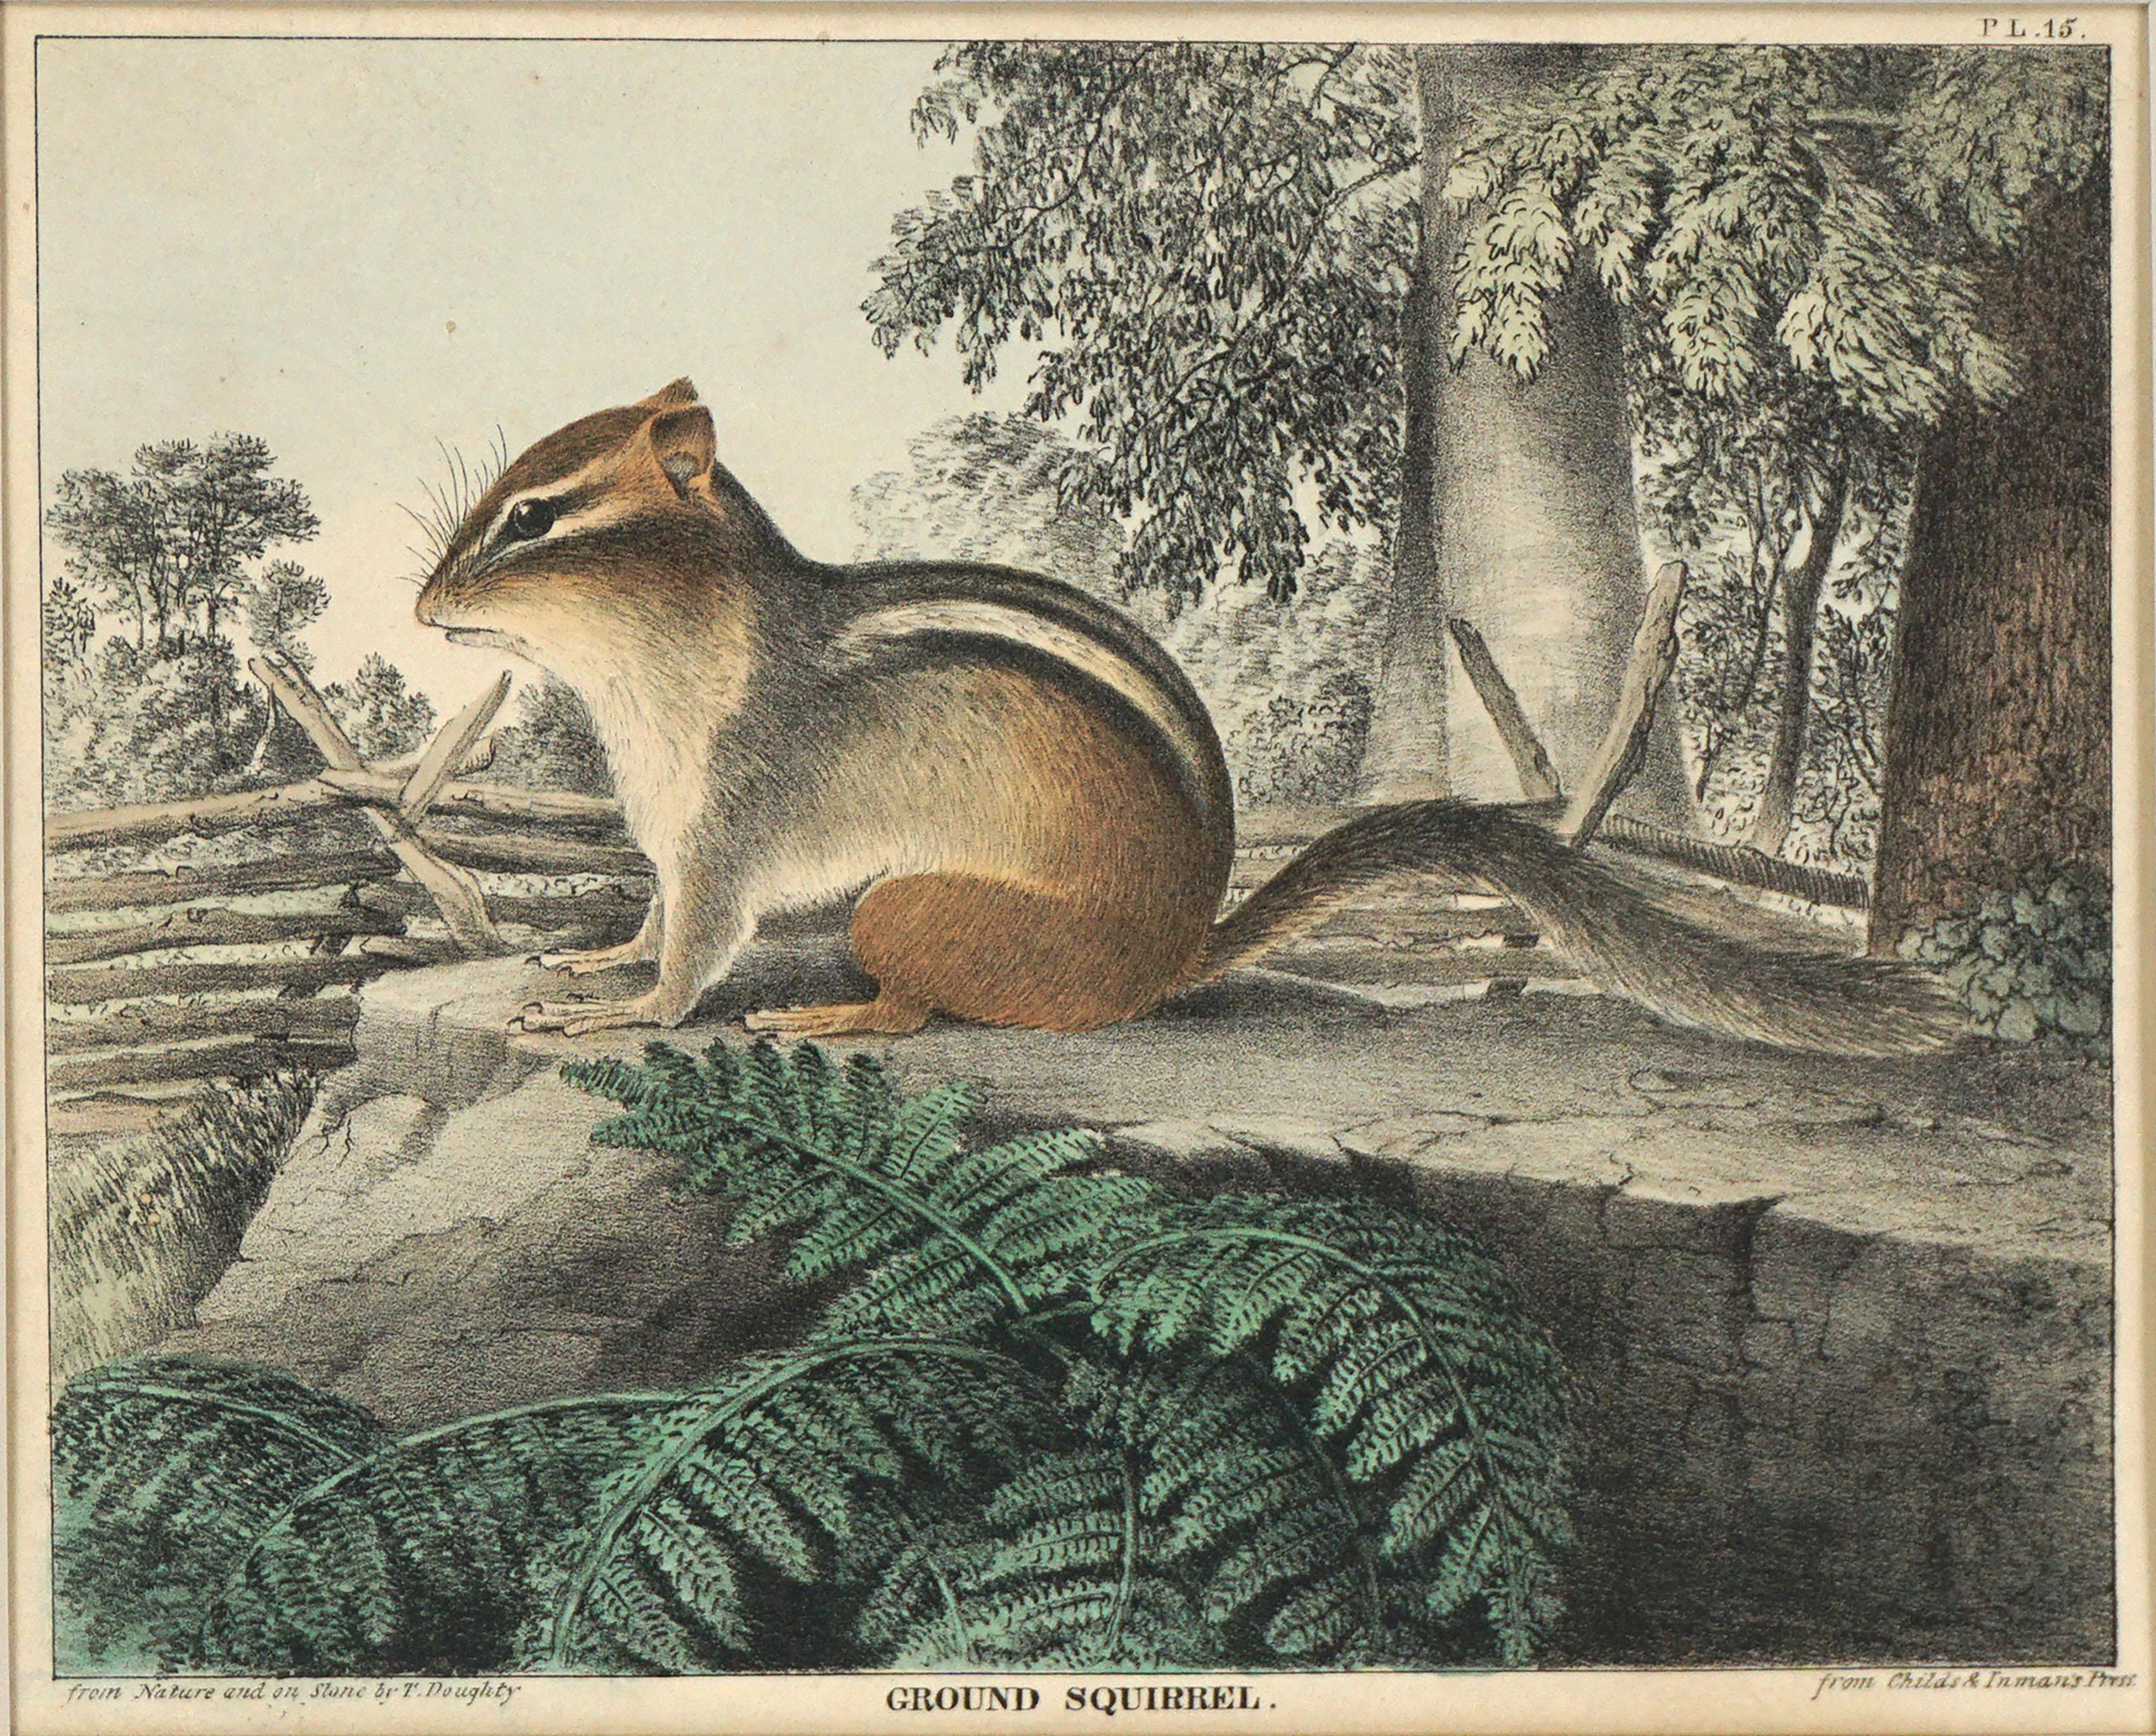 1830's Hand-colored Lithograph of a Ground Squirrel - Print by Thomas Doughty